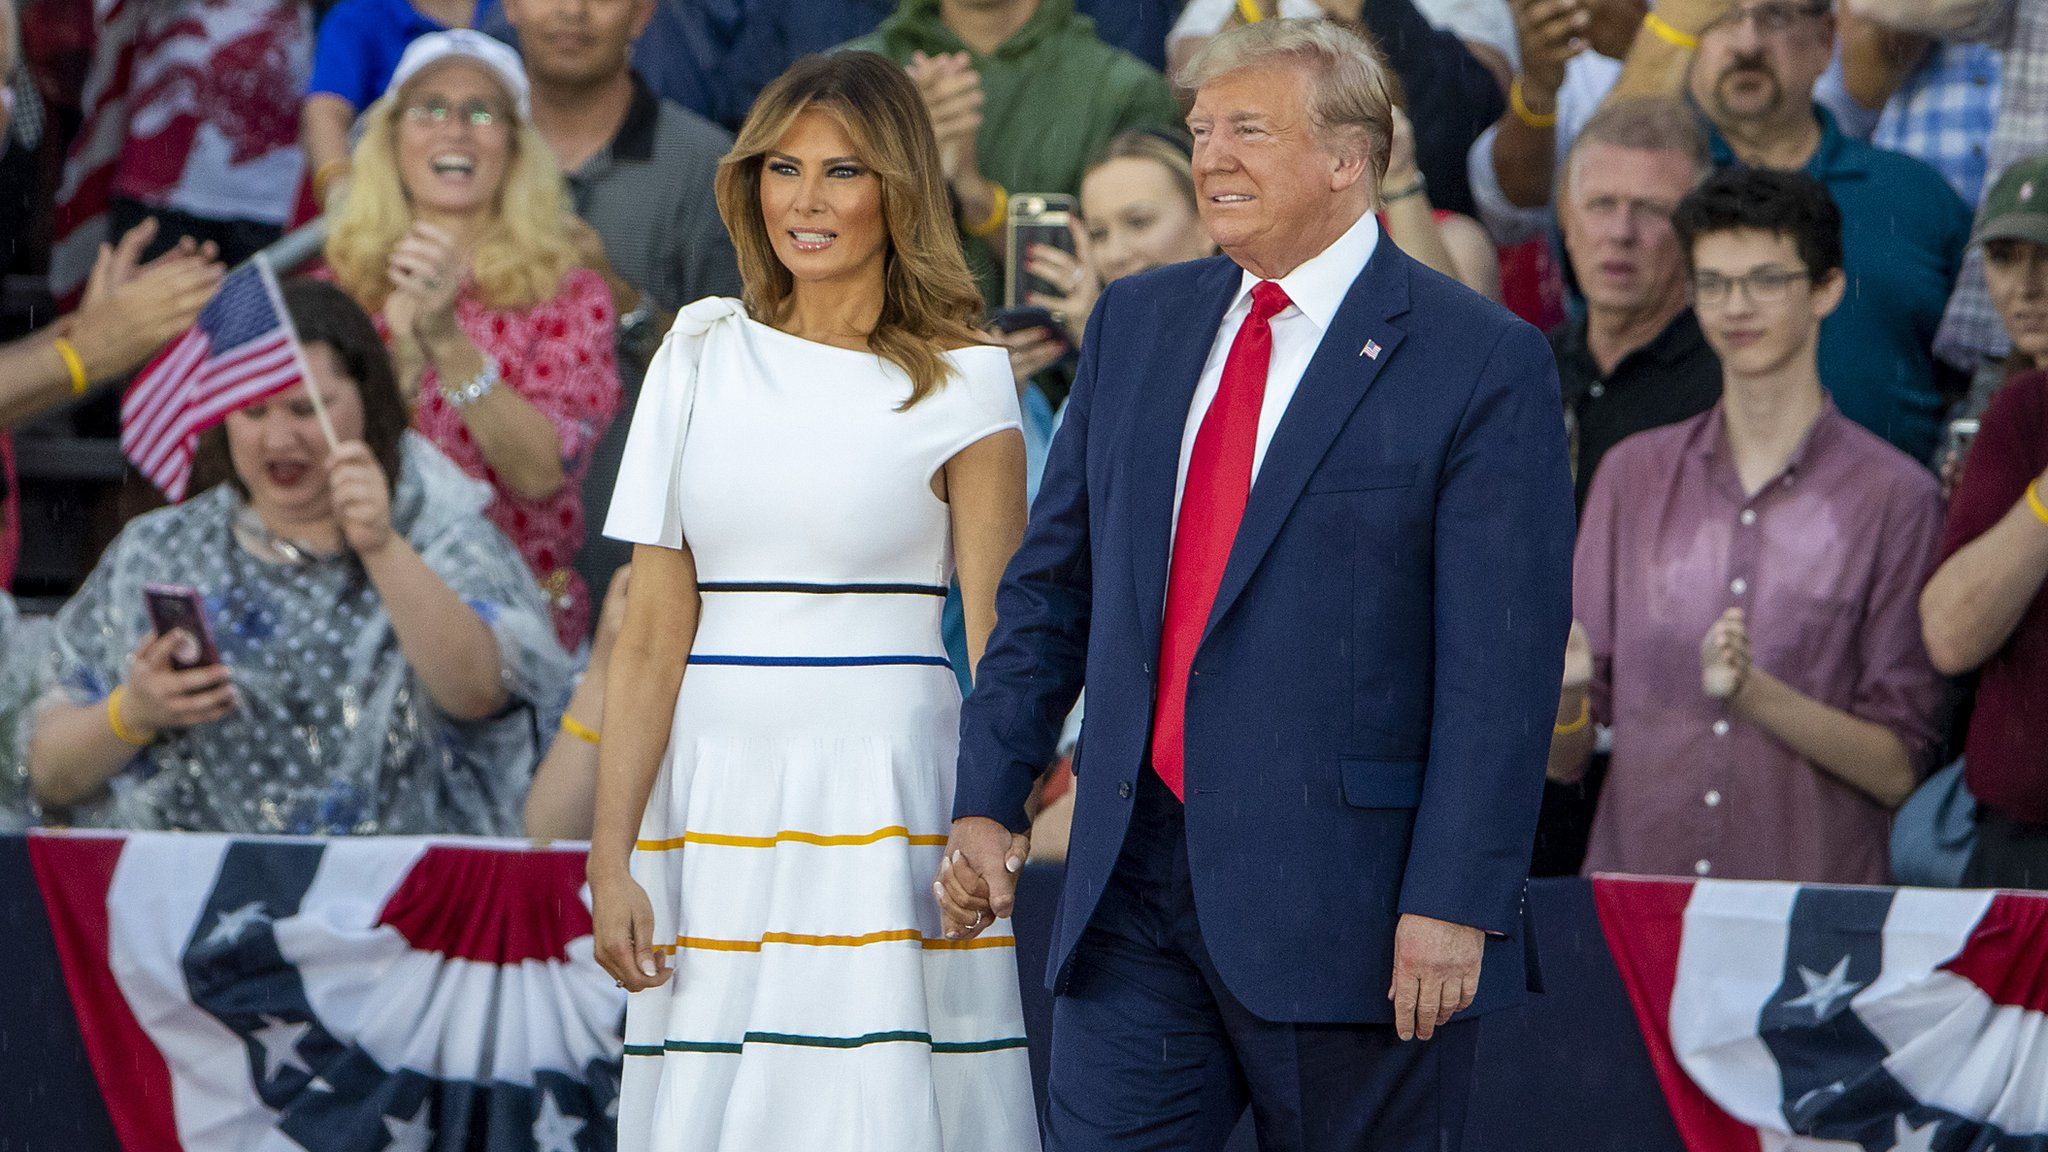 President Donald Trump and first lady Melania Trump take the stage on July 04, 2019 in Washington.